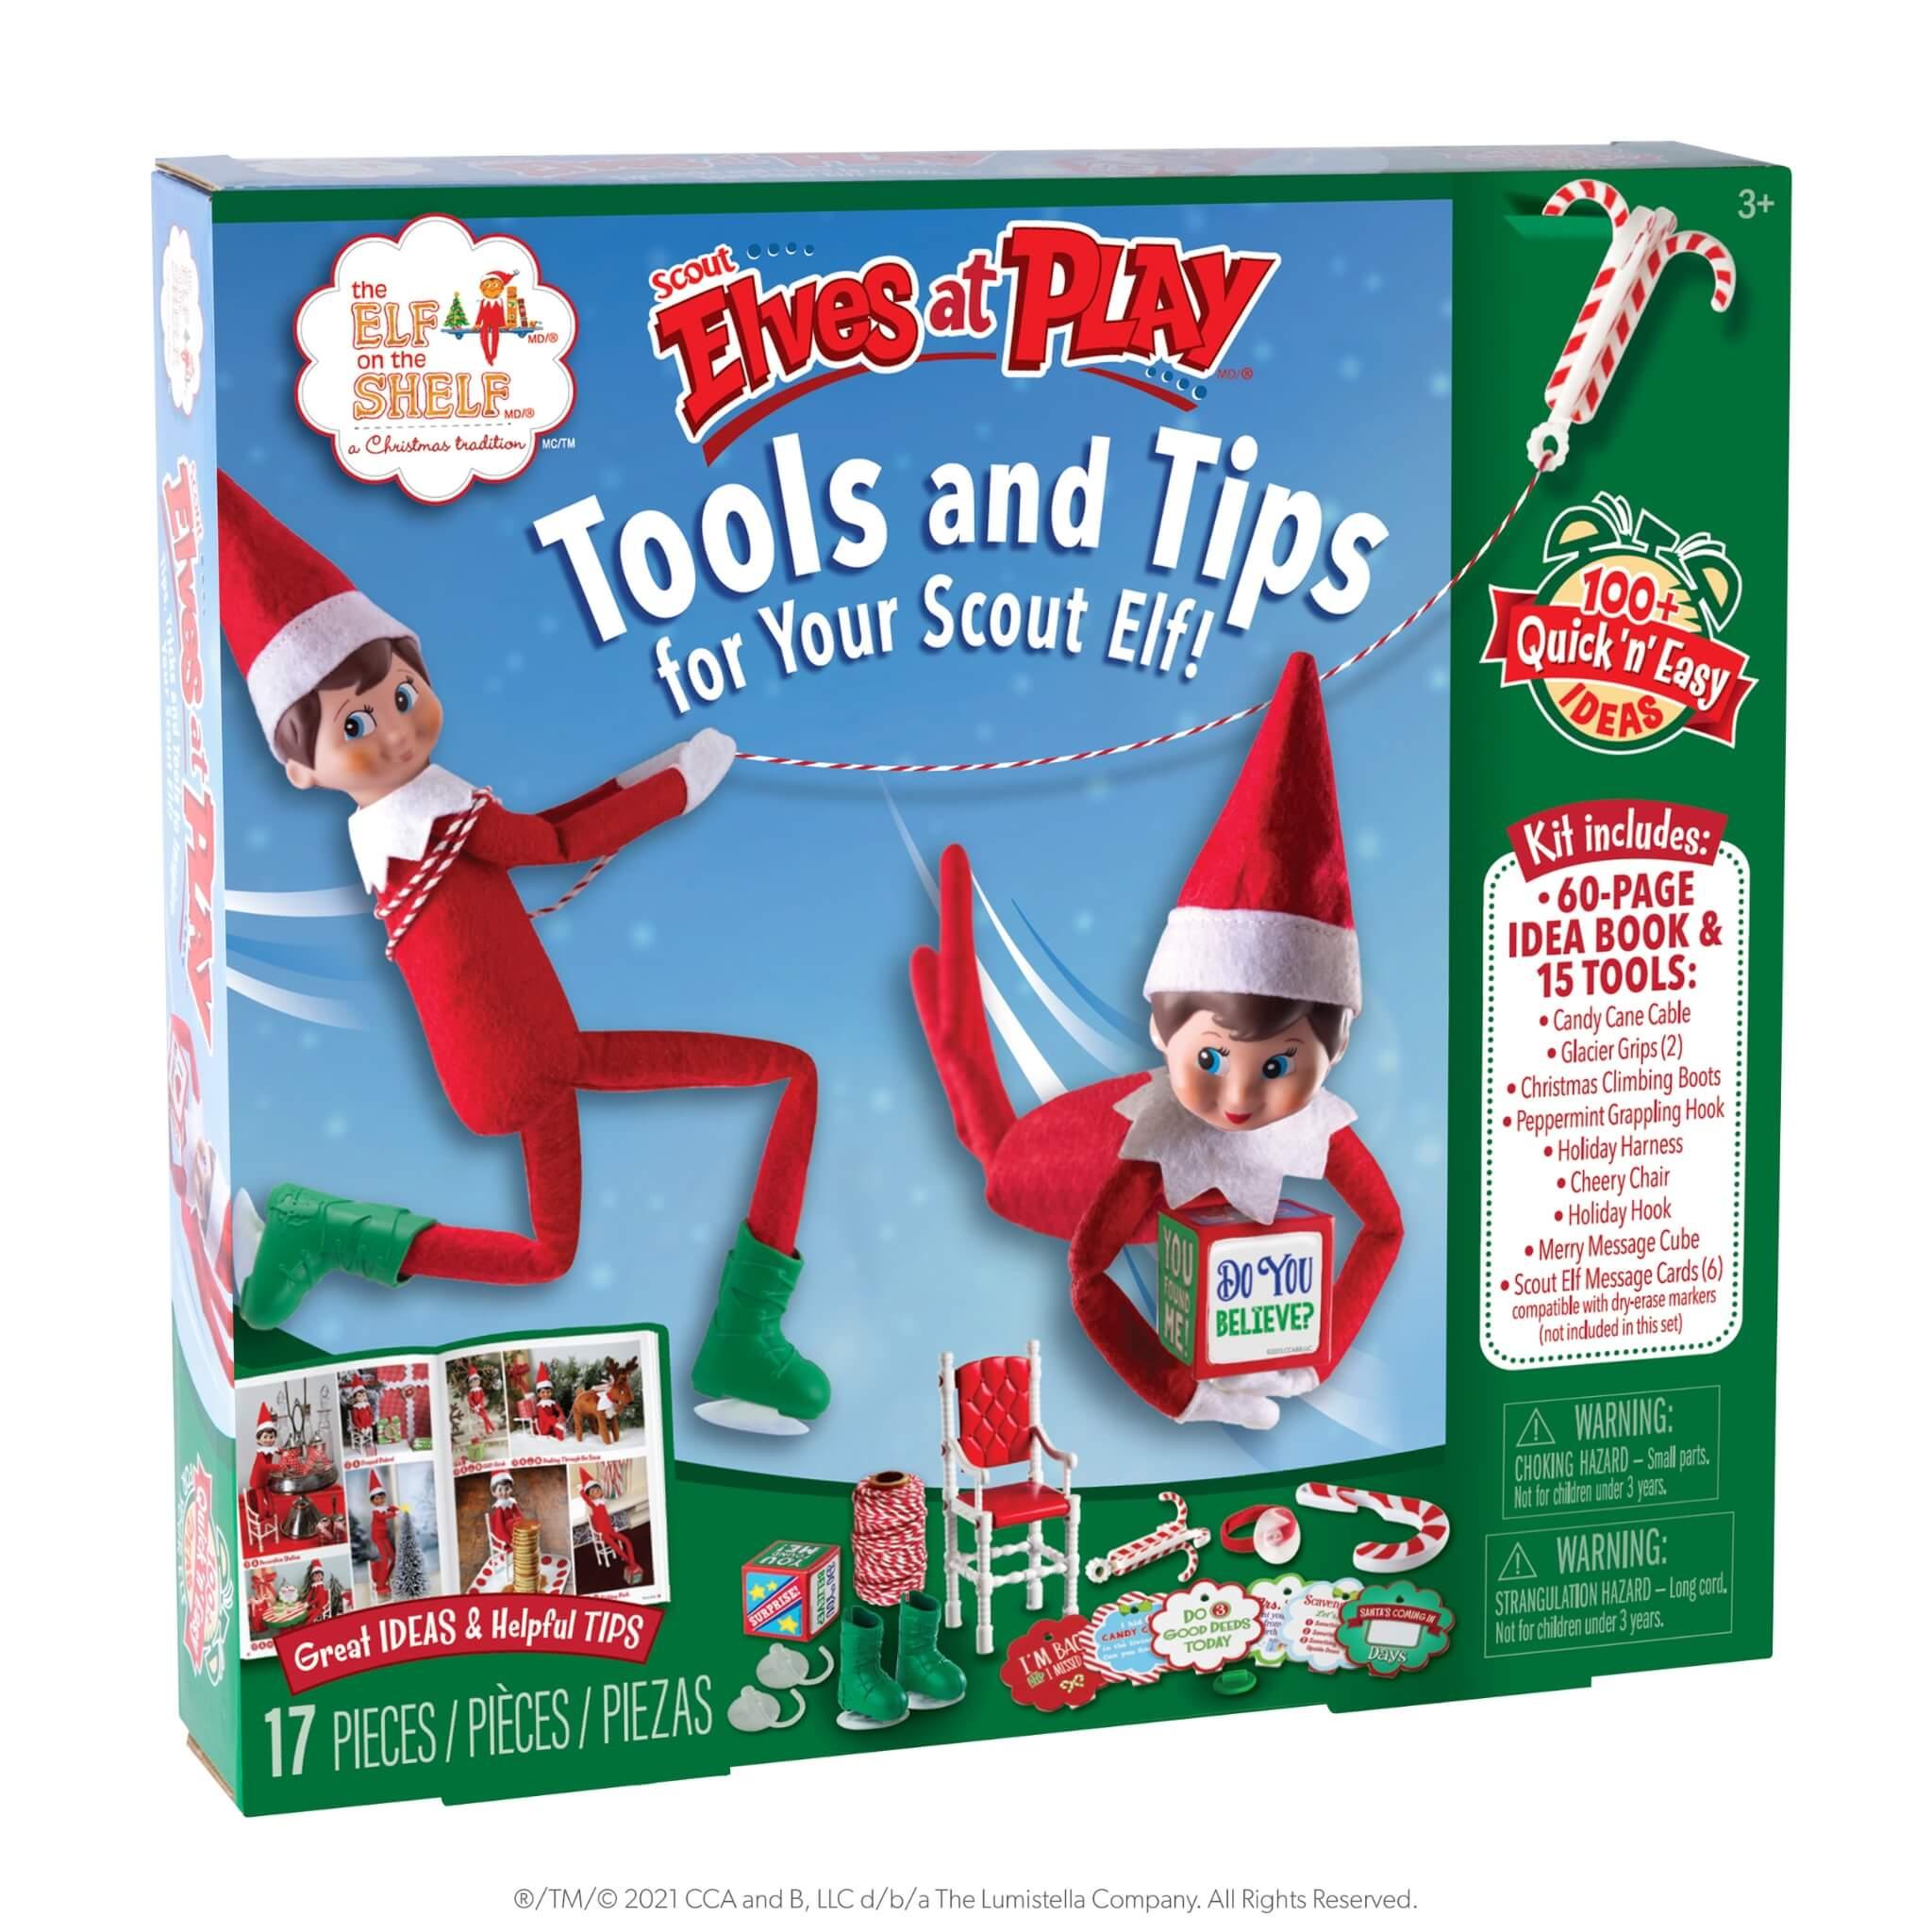 Action Figure Play Pack - Space Edition – Santa's Store: The Elf